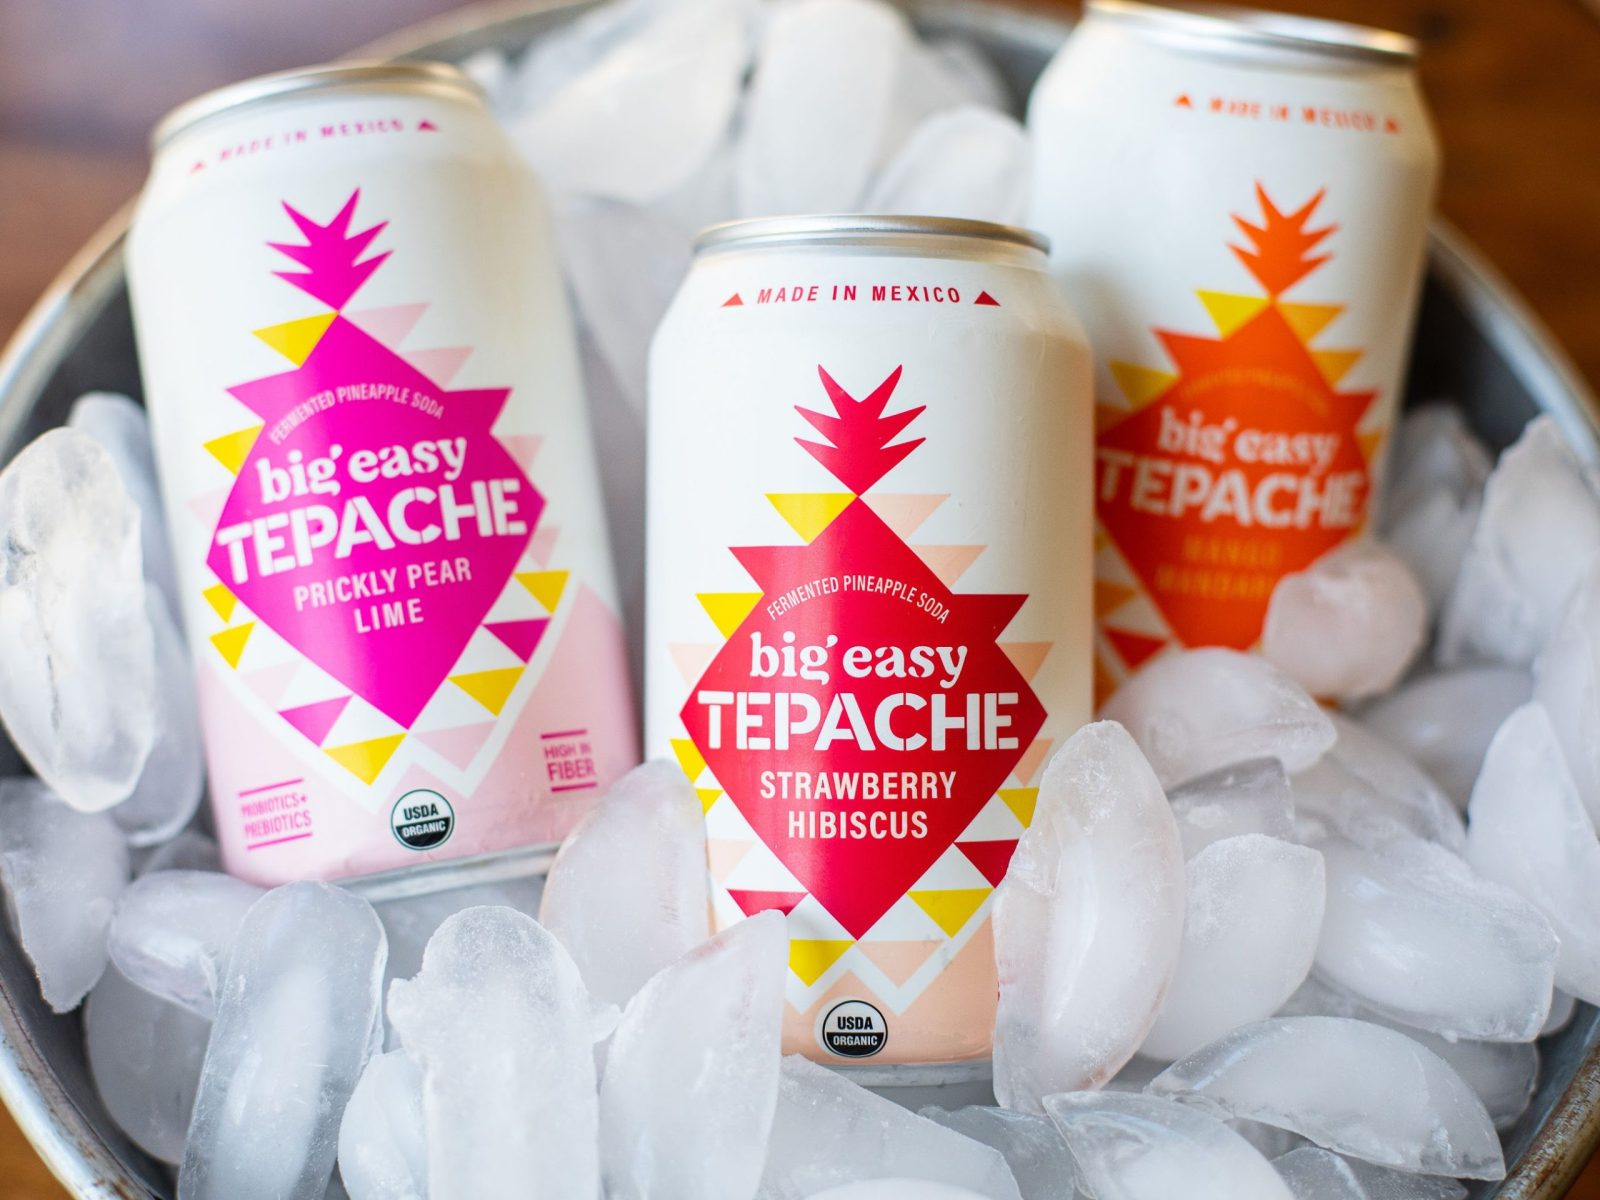 Big Easy Tepache Soda Is On Sale At Publix – Bubbly Refreshment With A Probiotic Punch!